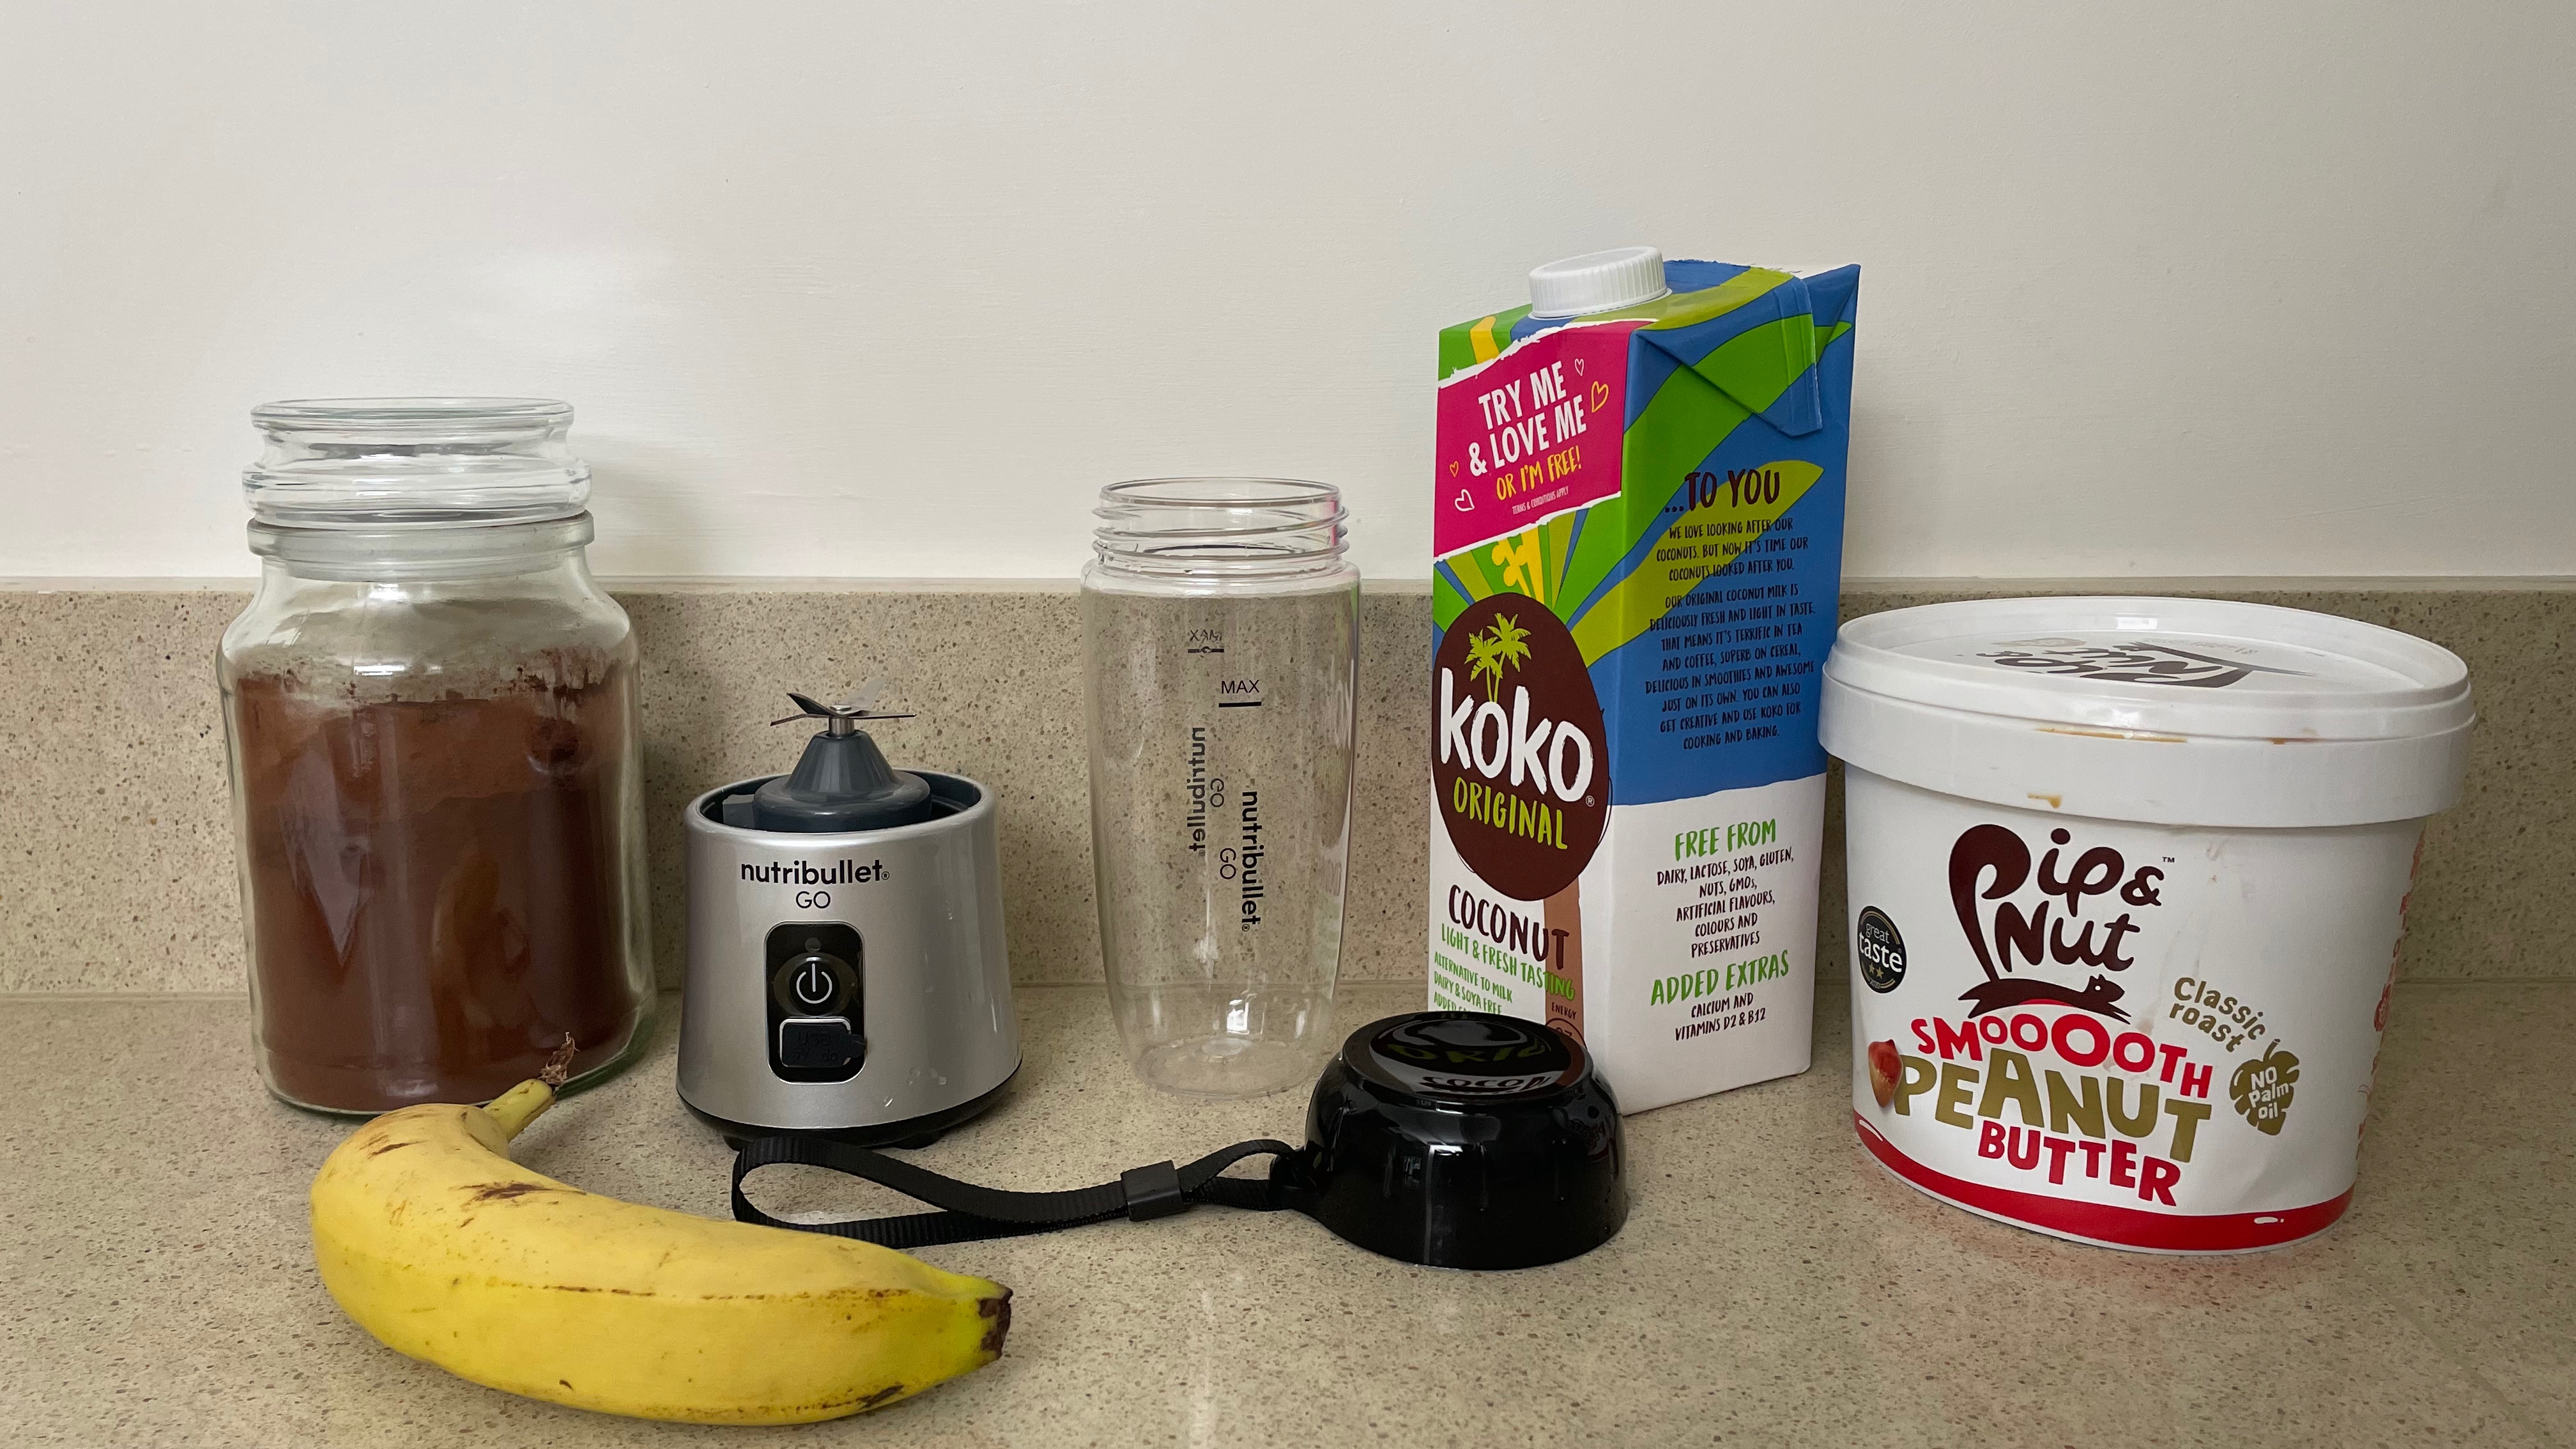 Nutribullet Go on counter with ingredients